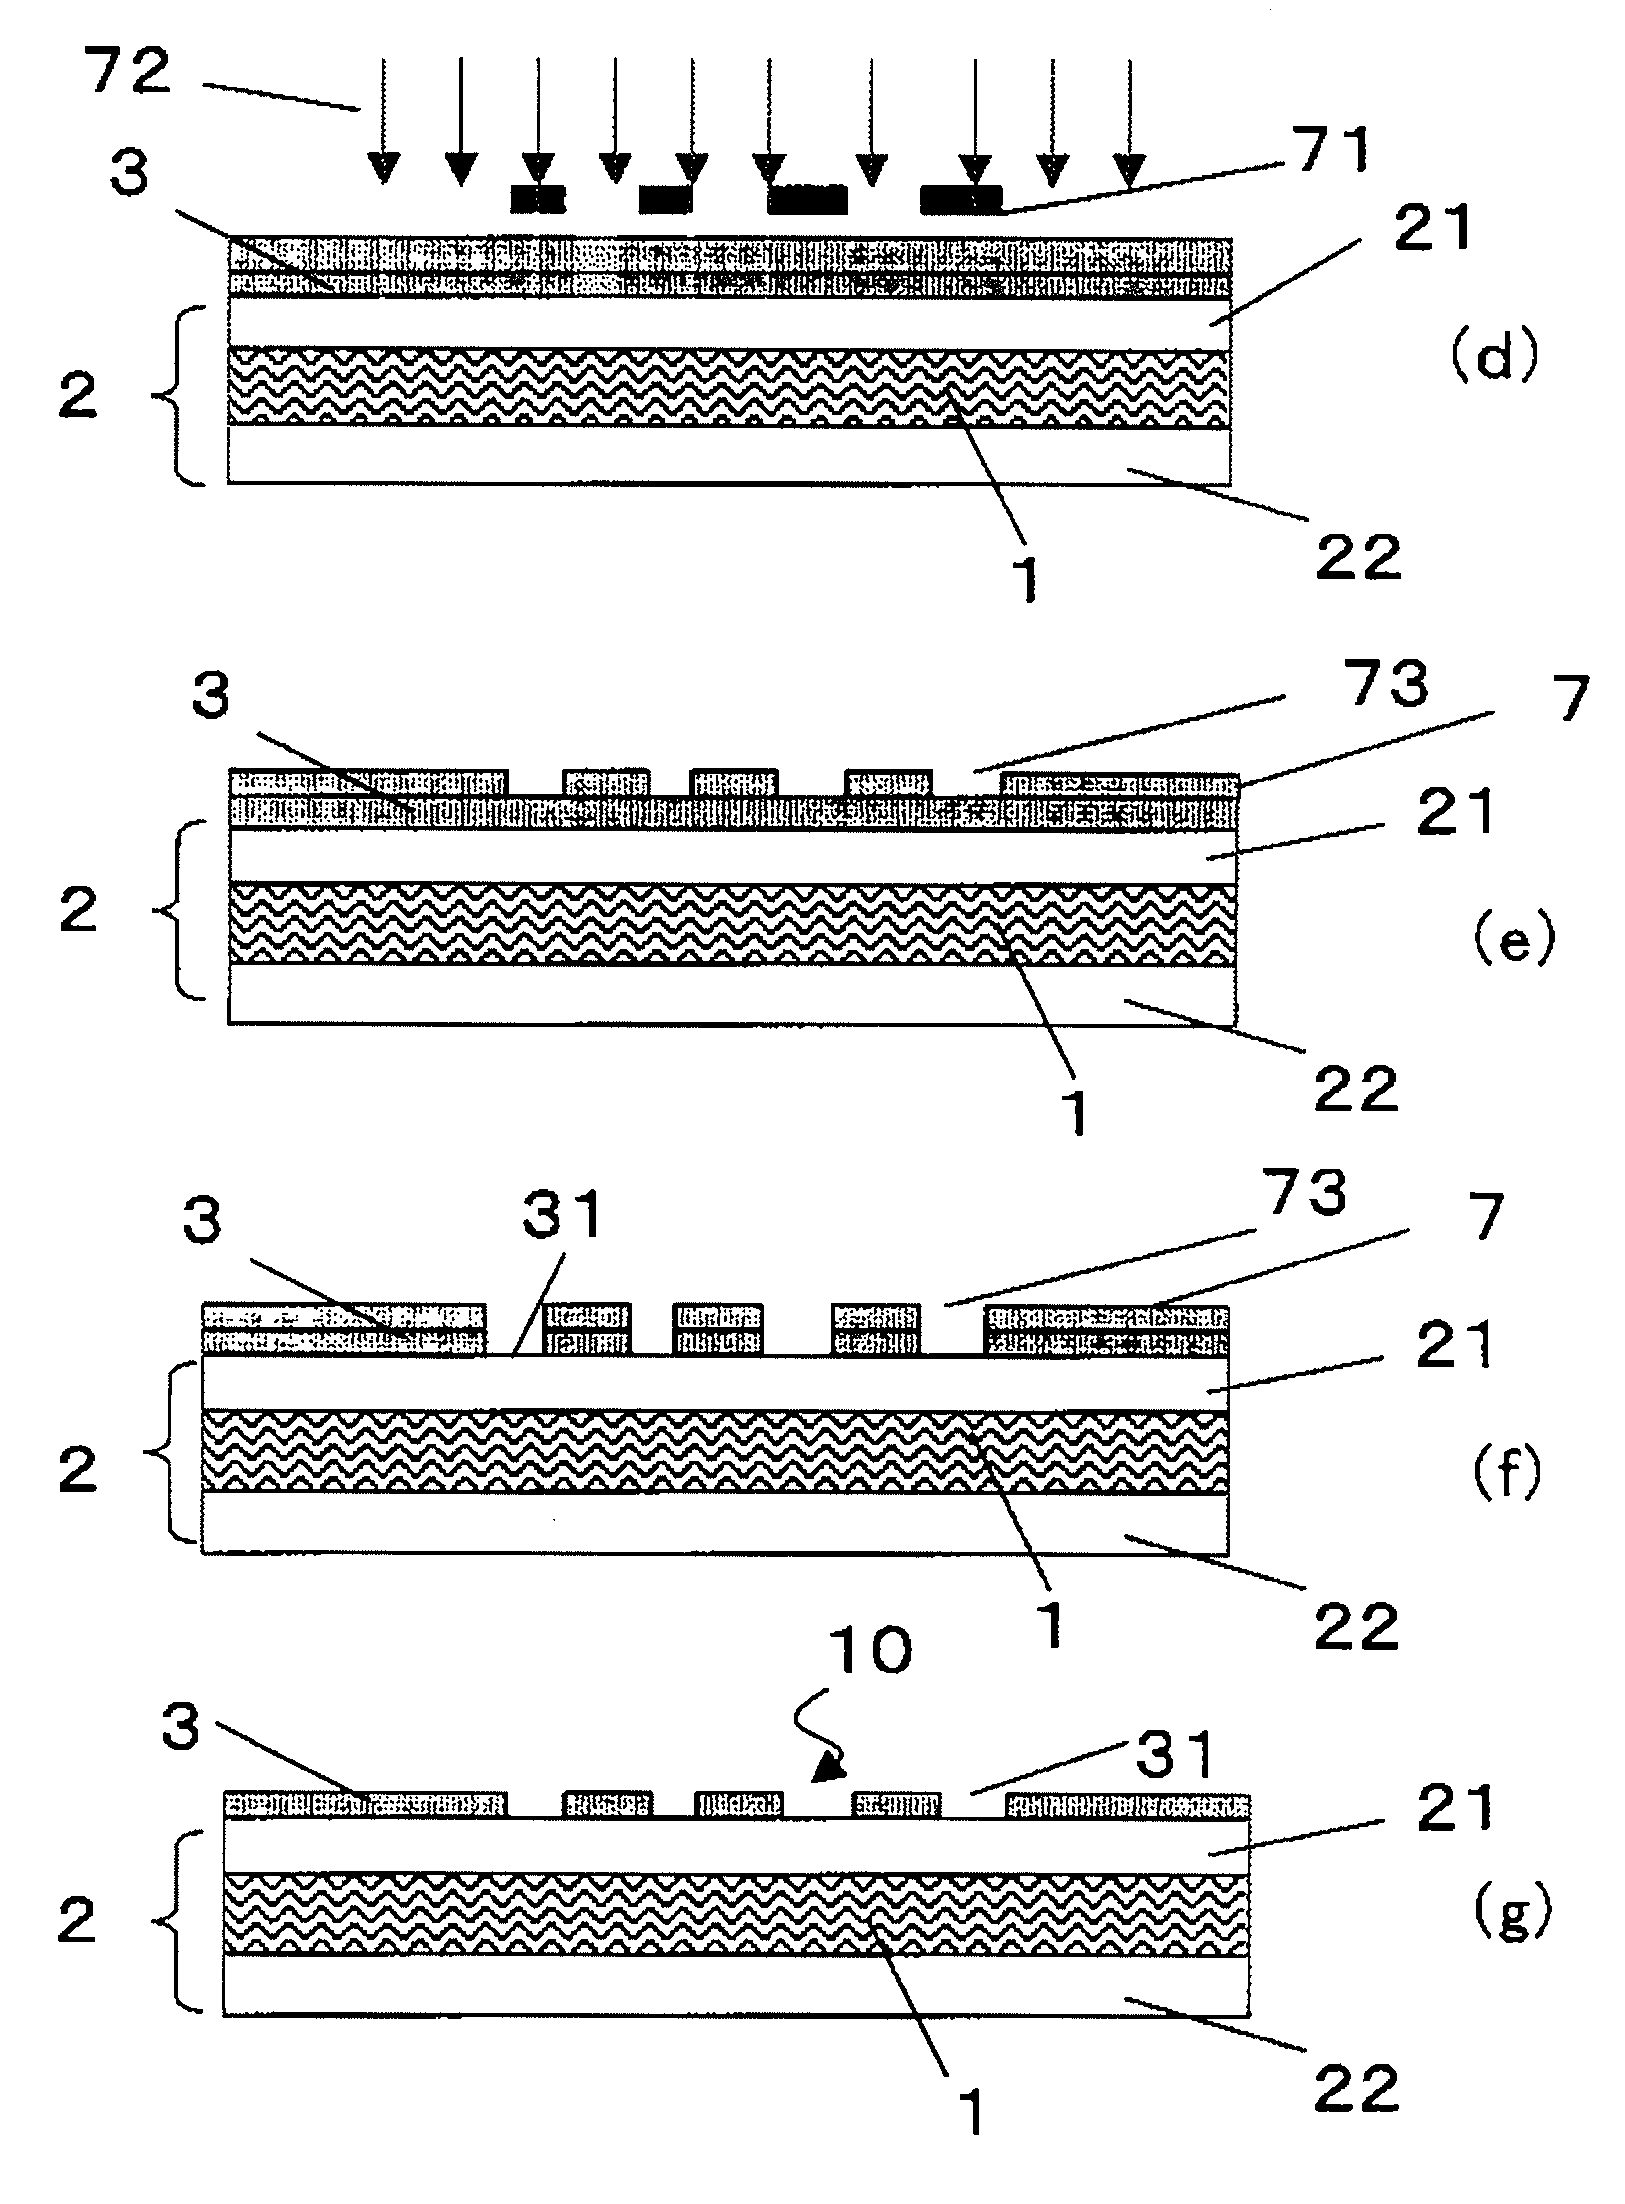 Laminated body, method of manufacturing susbtrate, substrate, and semiconductor device